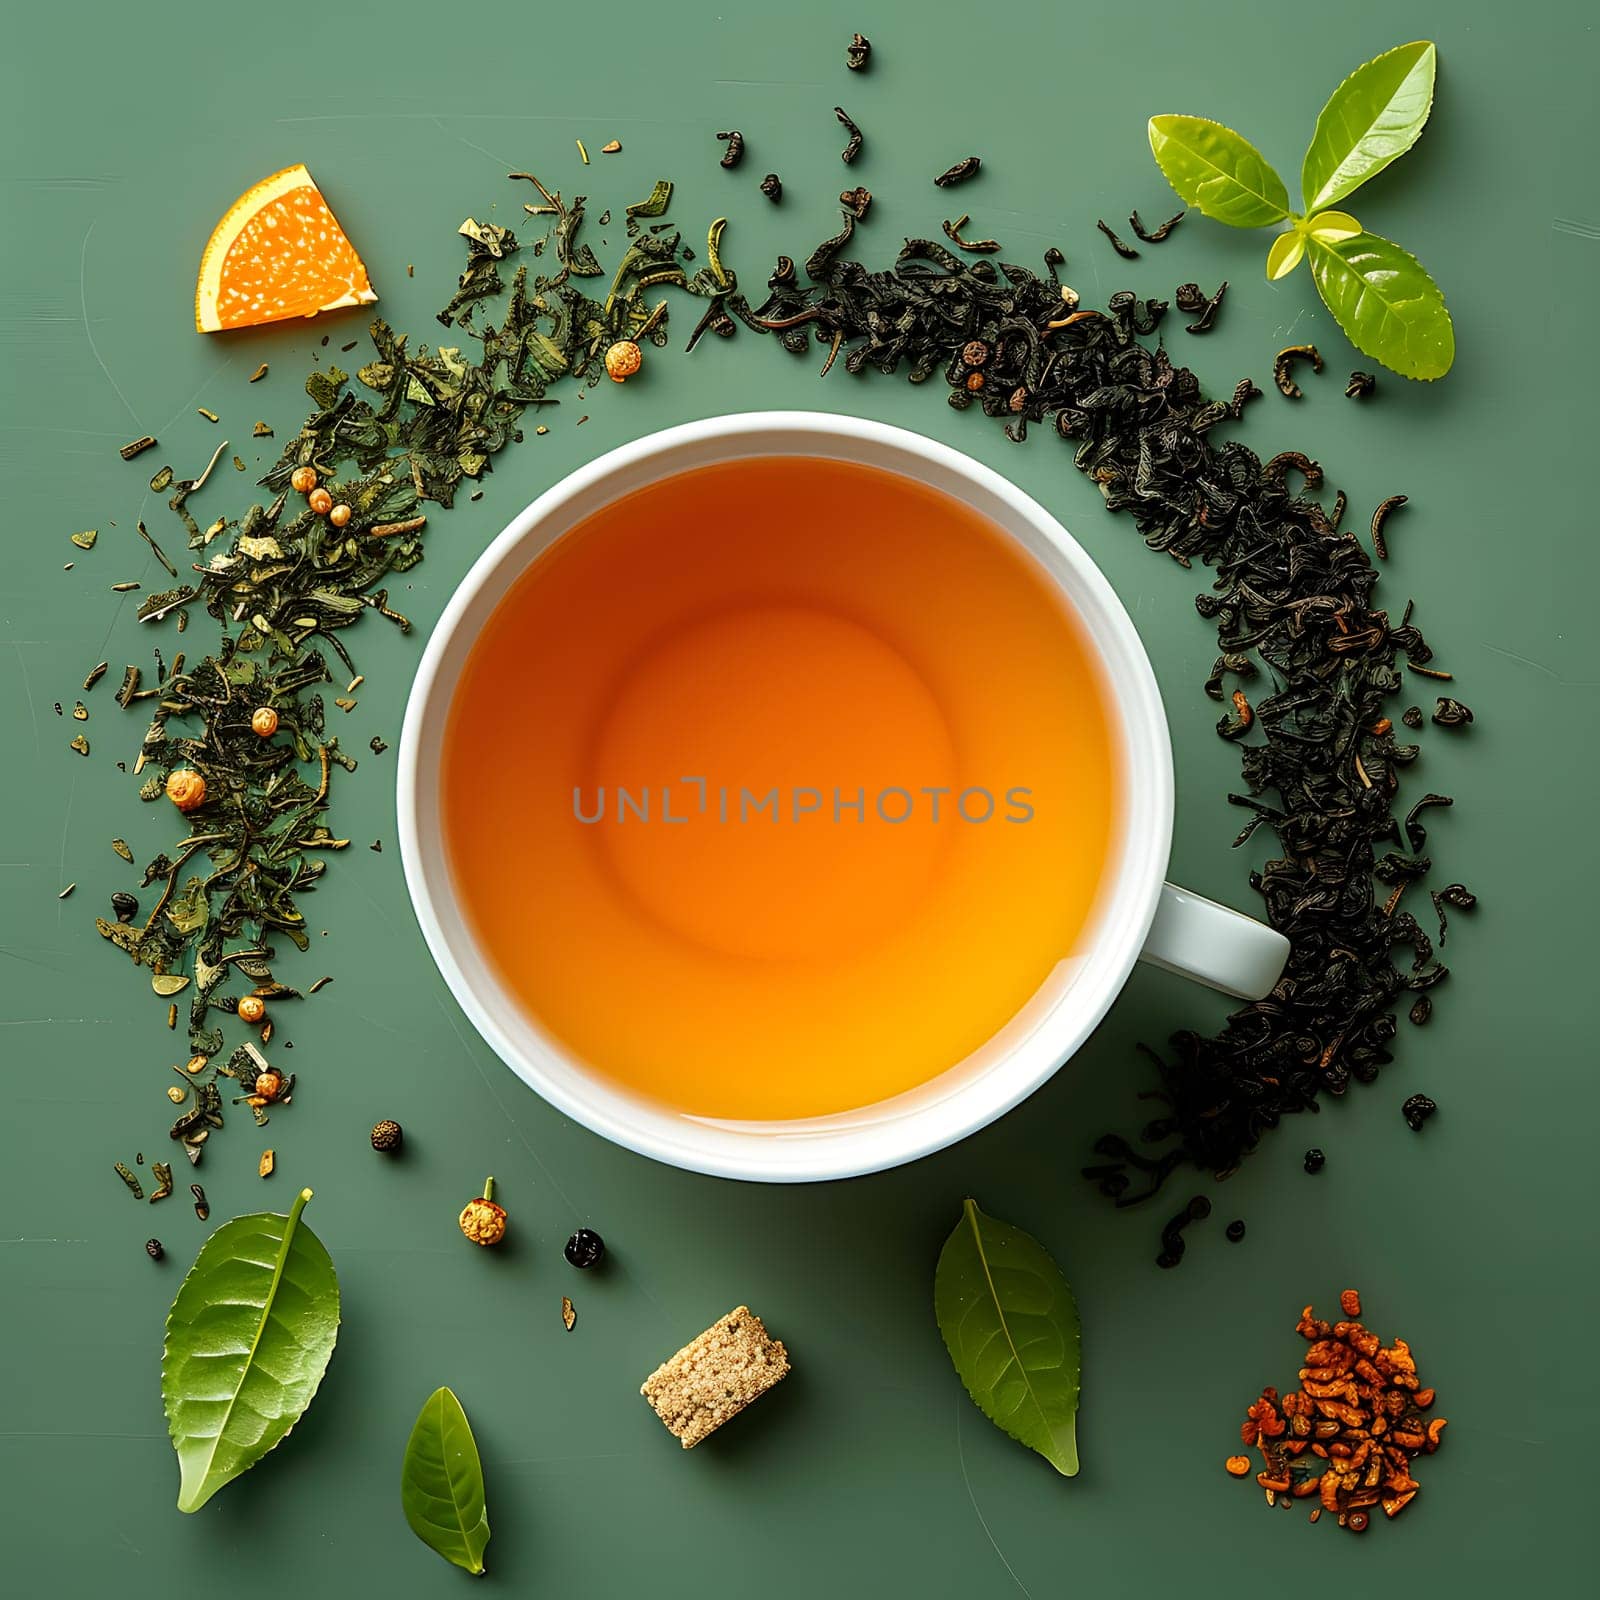 A Tableware set with a Cup holding Liquid tea made with Tieguanyin leaves, garnished with a slice of Rangpur orange, creating a refreshing Drink